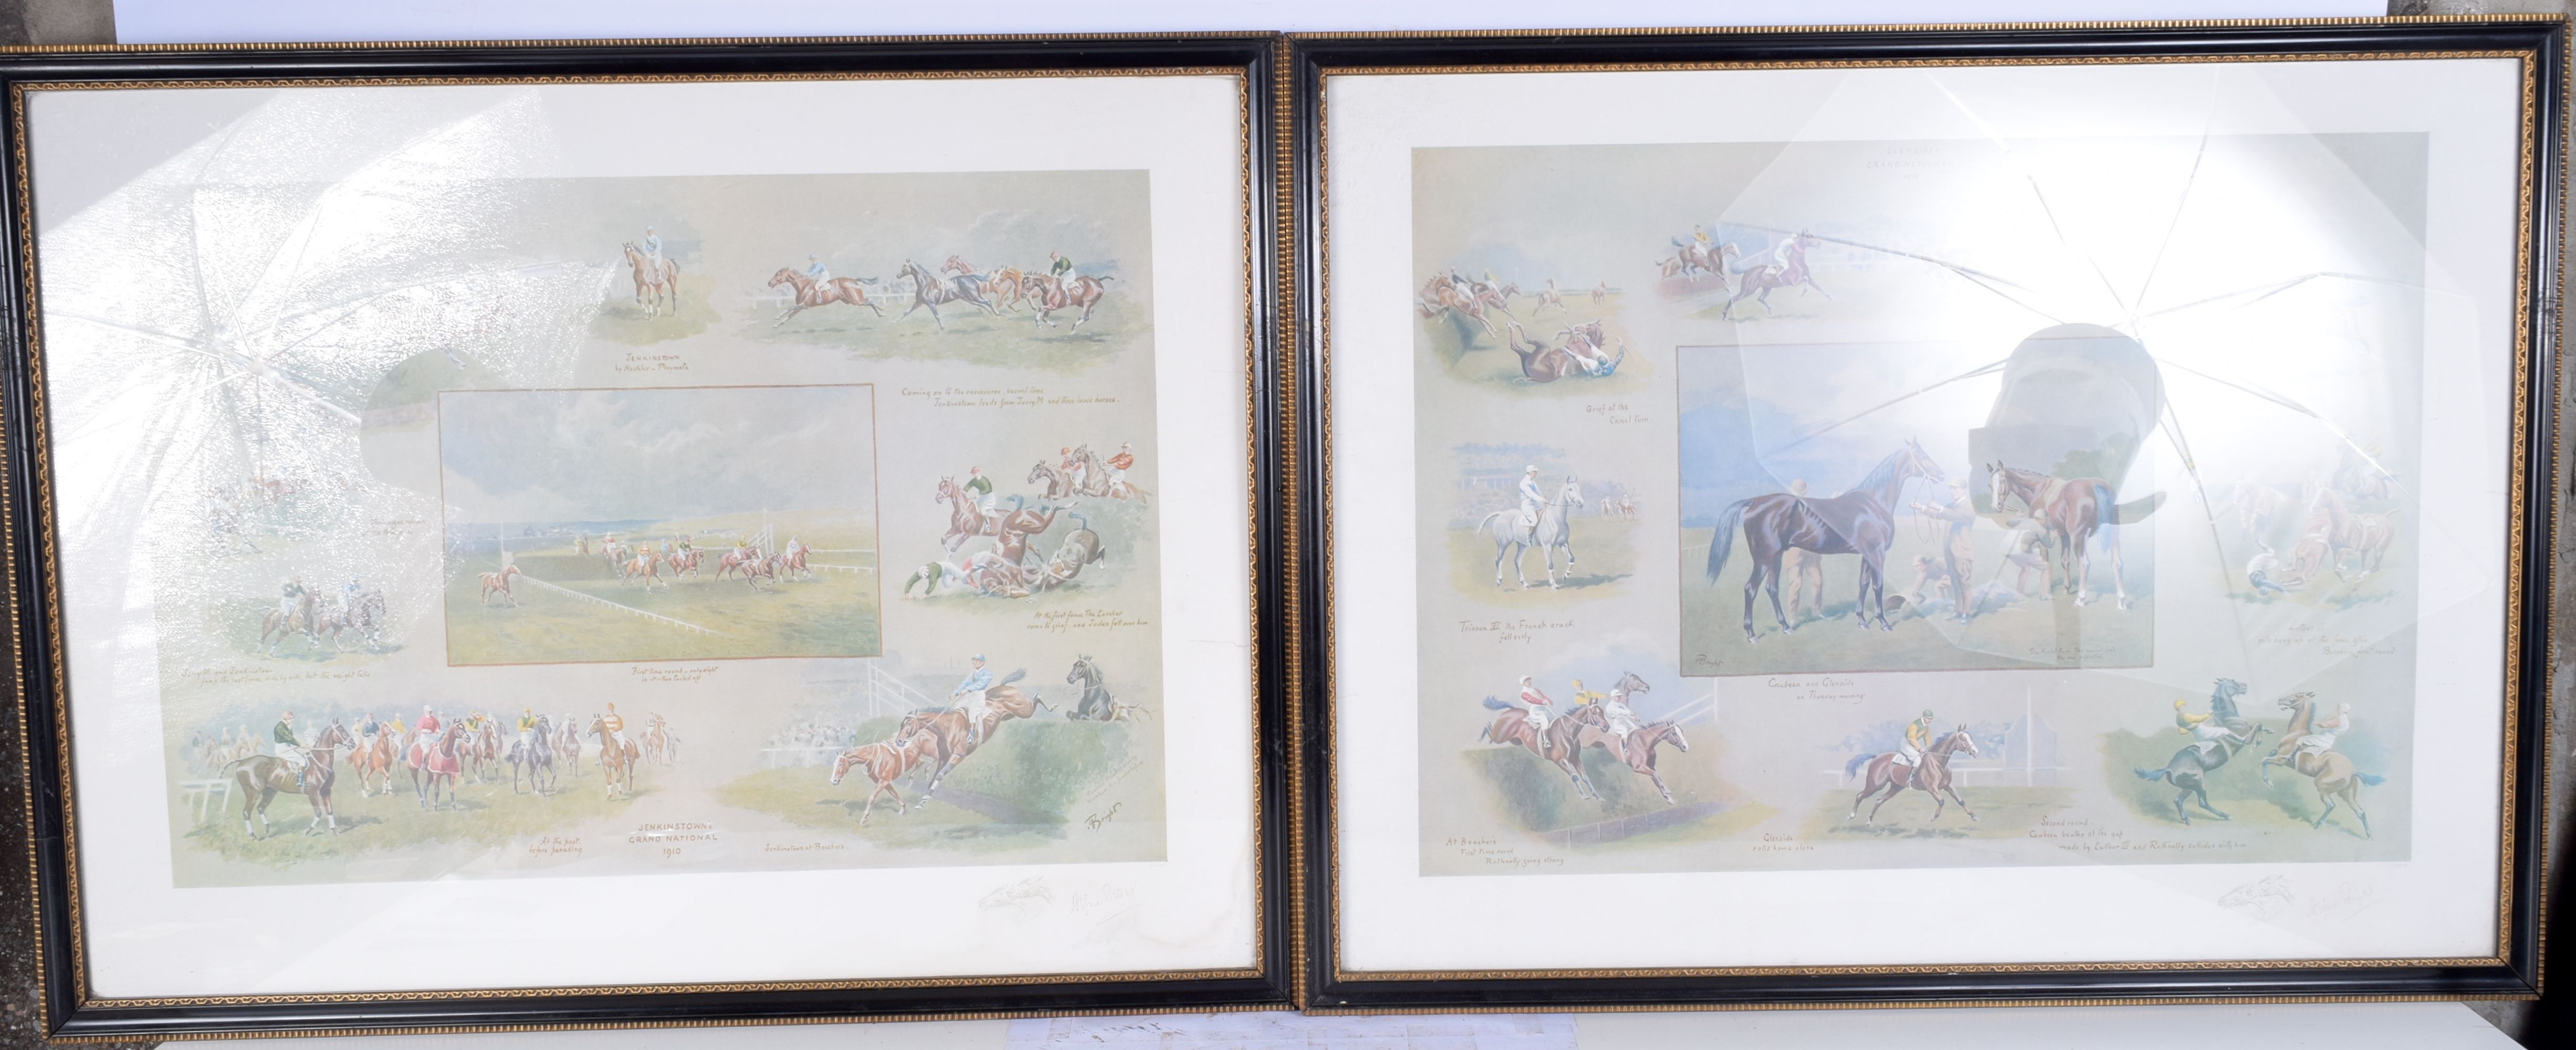 A large pair of Horse racing prints by Alfred Bright 42 x 60 cm (2)